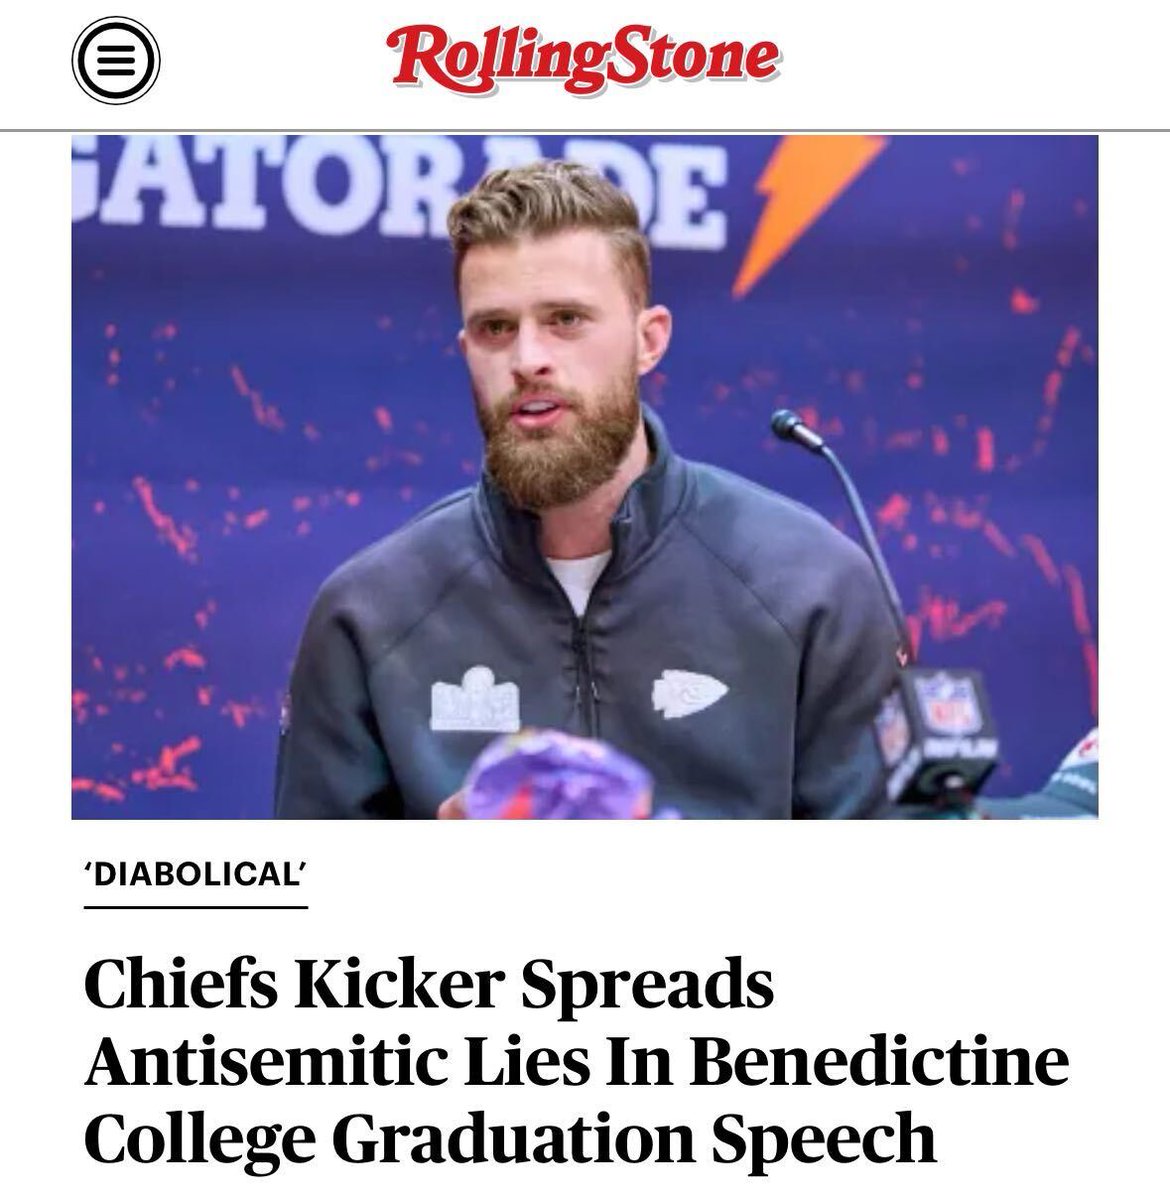 Chiefs kicker Harrison Butker gave a sexist, antisemitic speech in which he falsely claimed Congress “passed a bill where stating something as basic as the Biblical teaching of who killed Jesus could land you in jail.'

Watch: rollingstone.com/politics/polit…